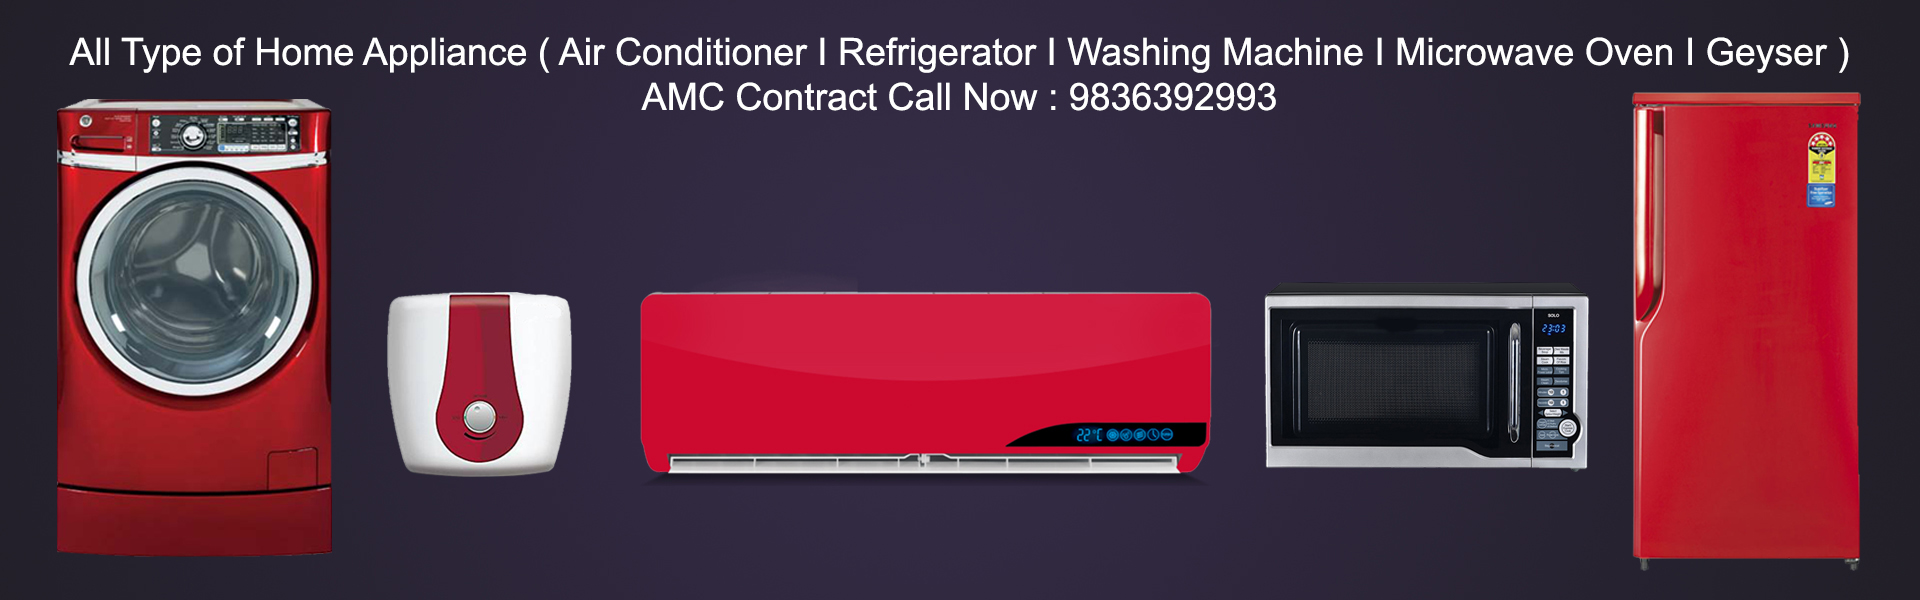 All Type of Home Appliance ( AC / Refrigerator / Washing Machine / Microwave Oven / Geyser ), AMC Contract ➥ Call Now : 9836392993